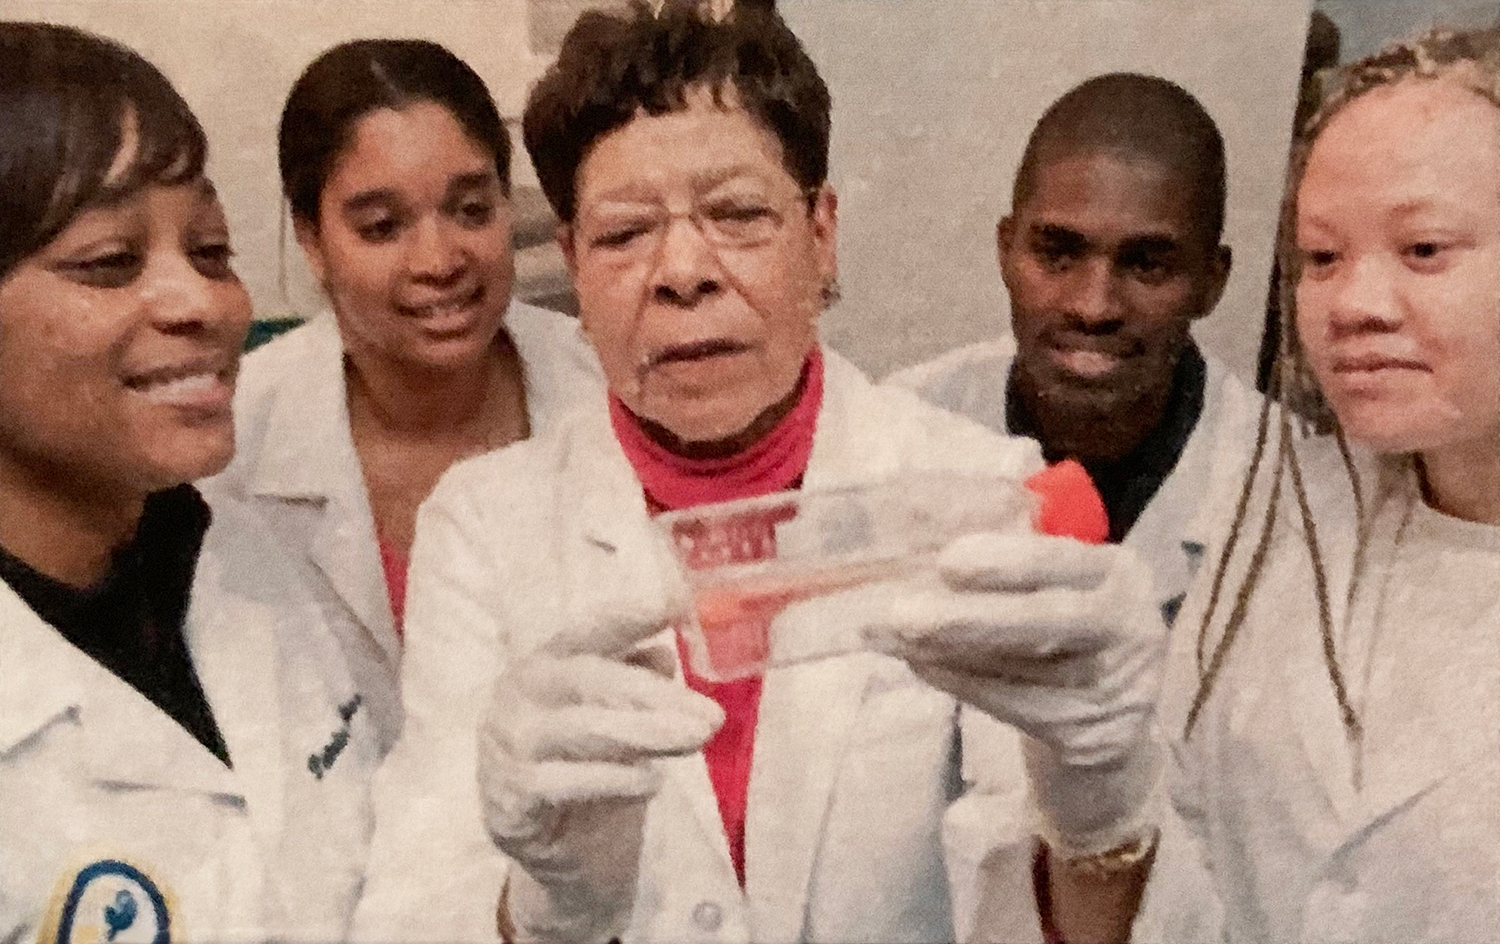 Dolores C. Shockley, PhD, demonstrating the use of a scientific device, flanked by four students